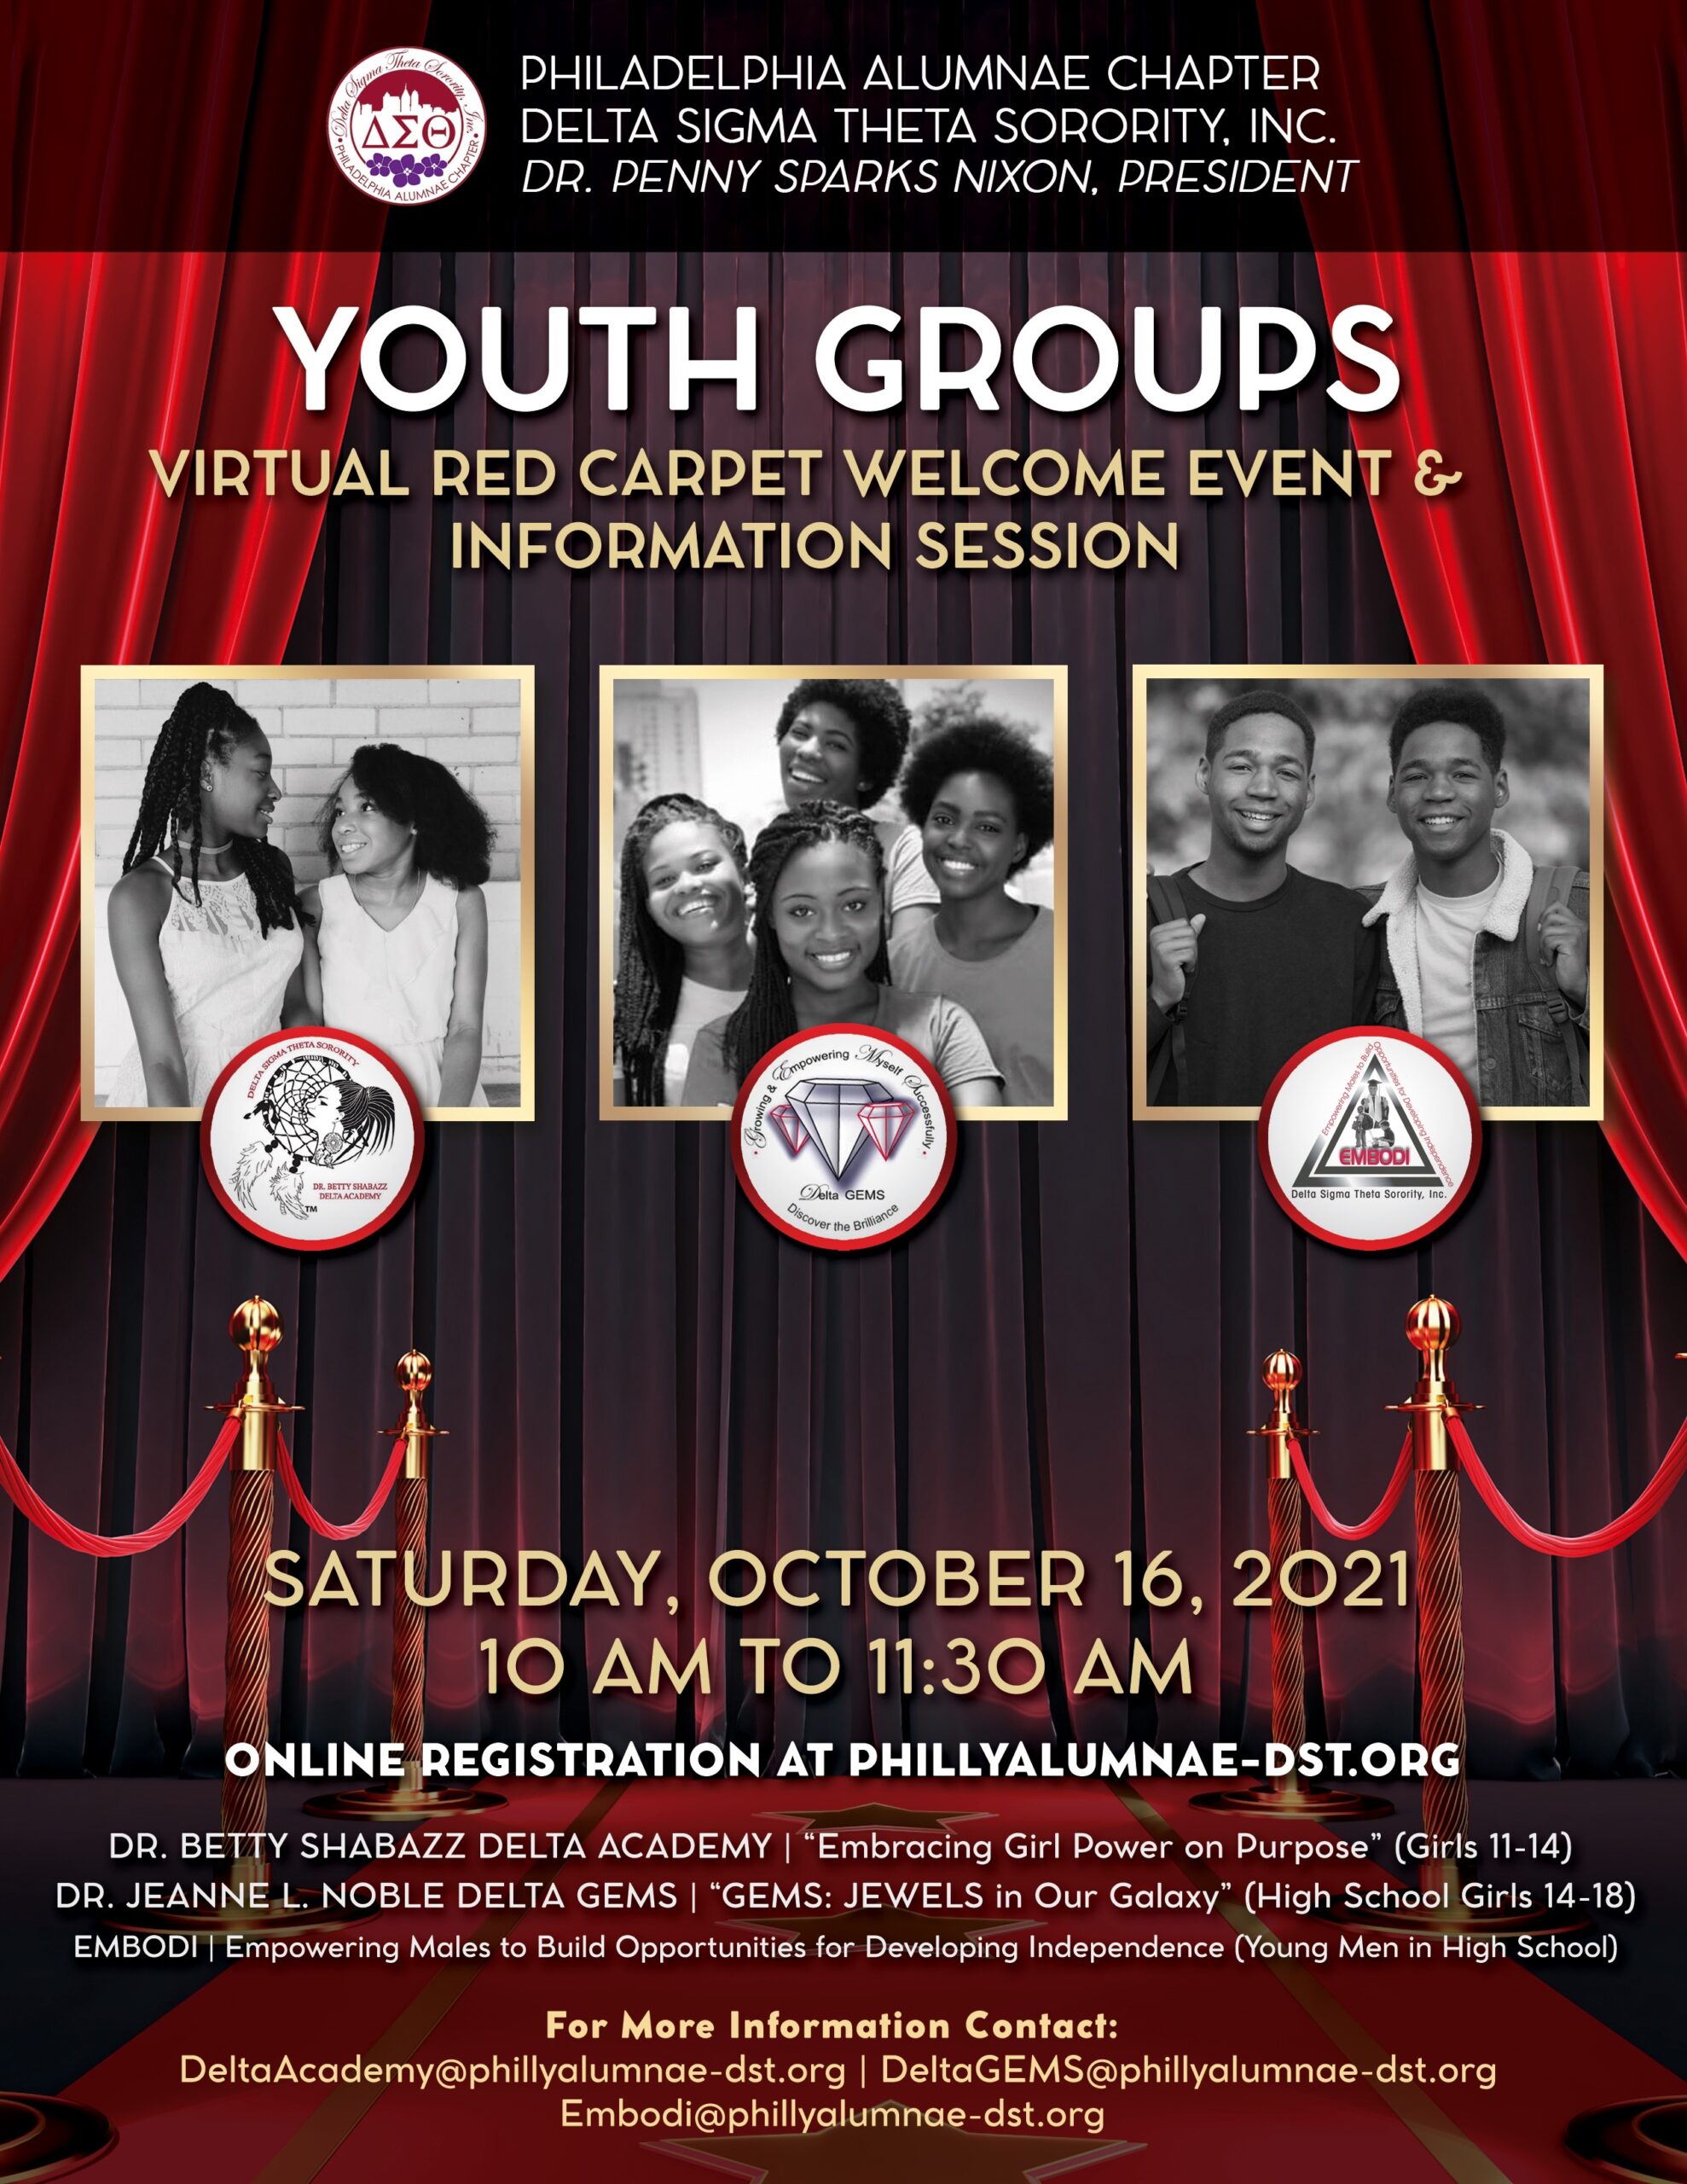 Youth Groups Virtual Red Carpet Welcome Event & Information Session